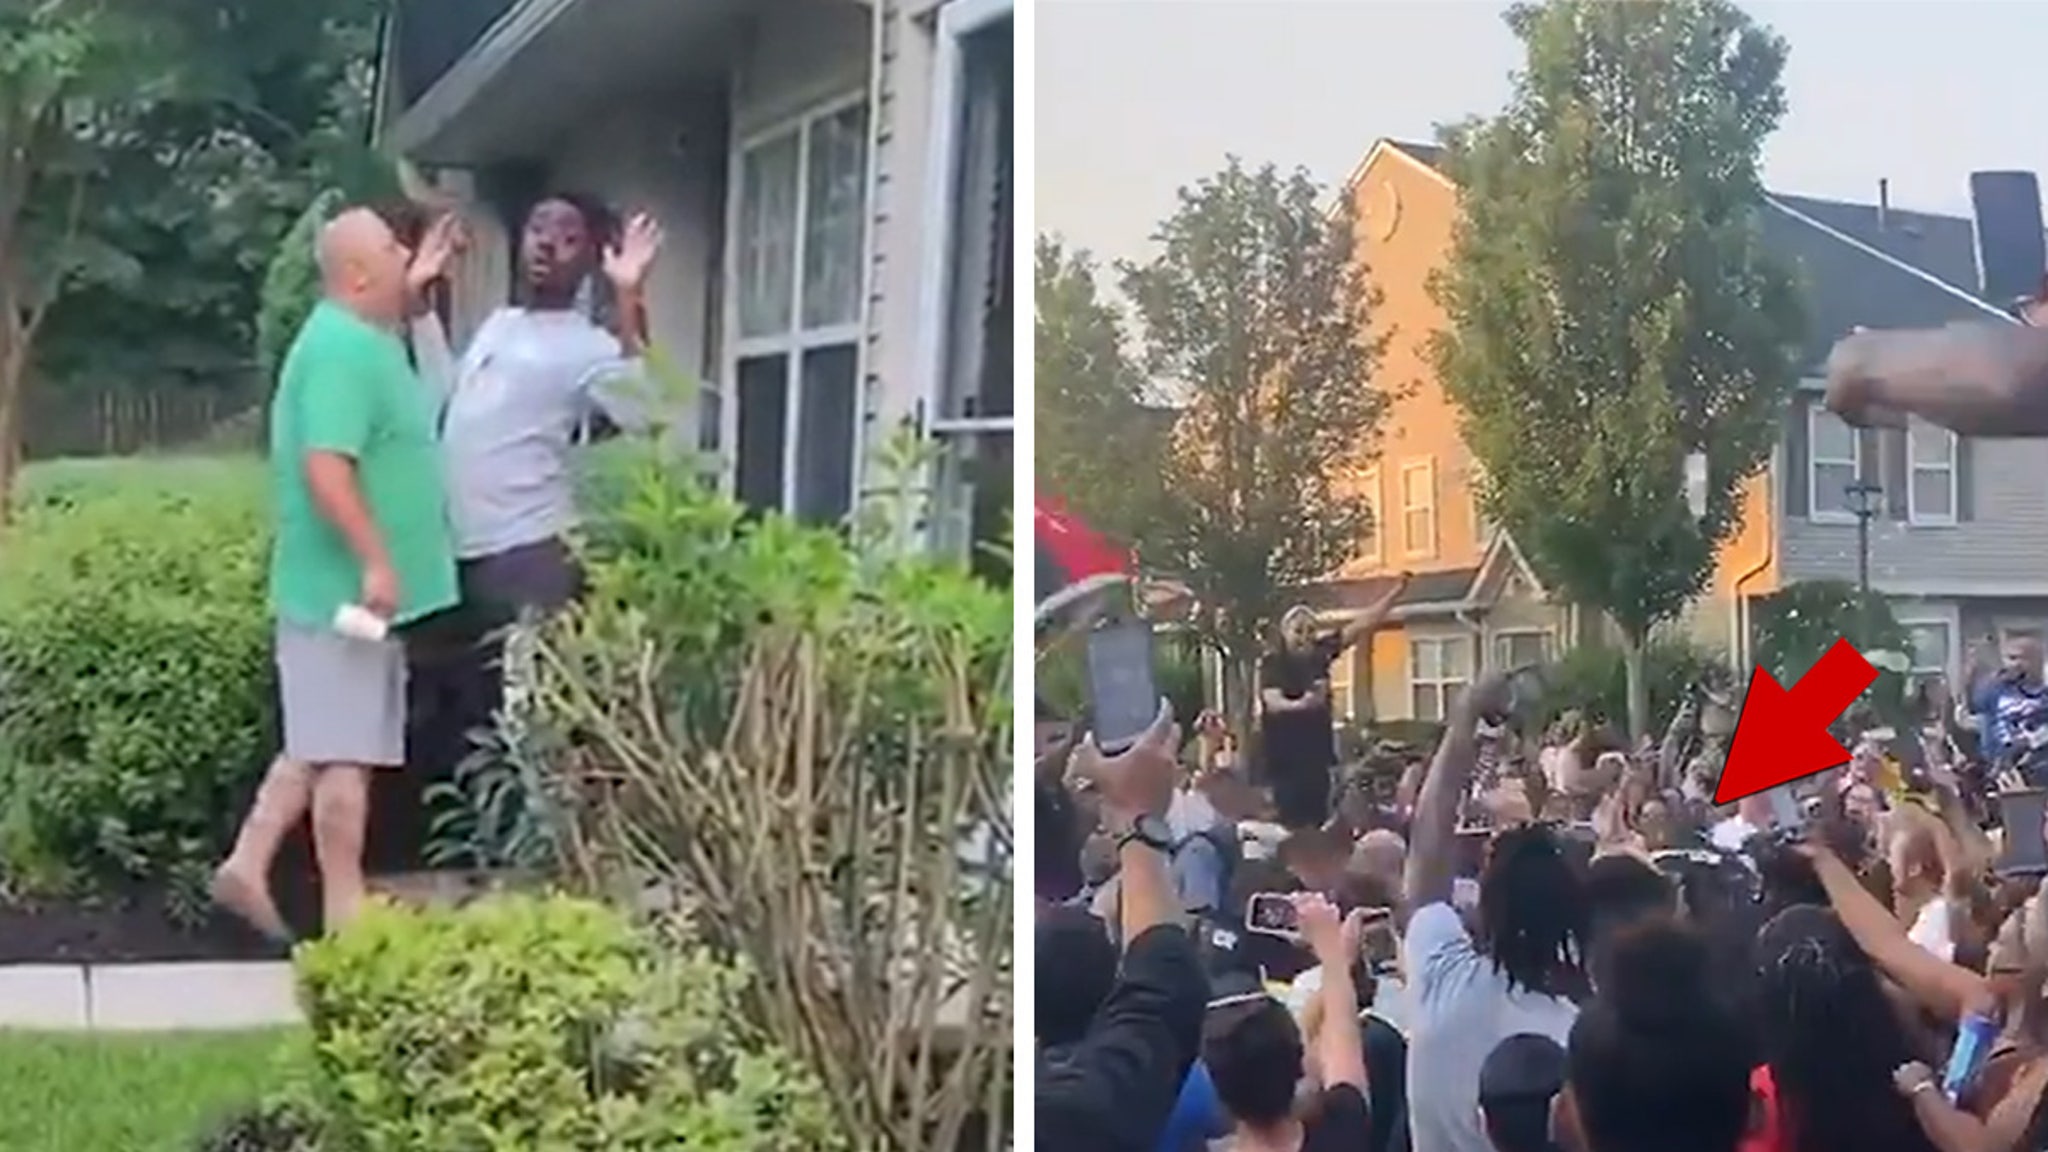 Man Gives Out Address Amid Racist Rant, Pelted By Protesters During Arrest